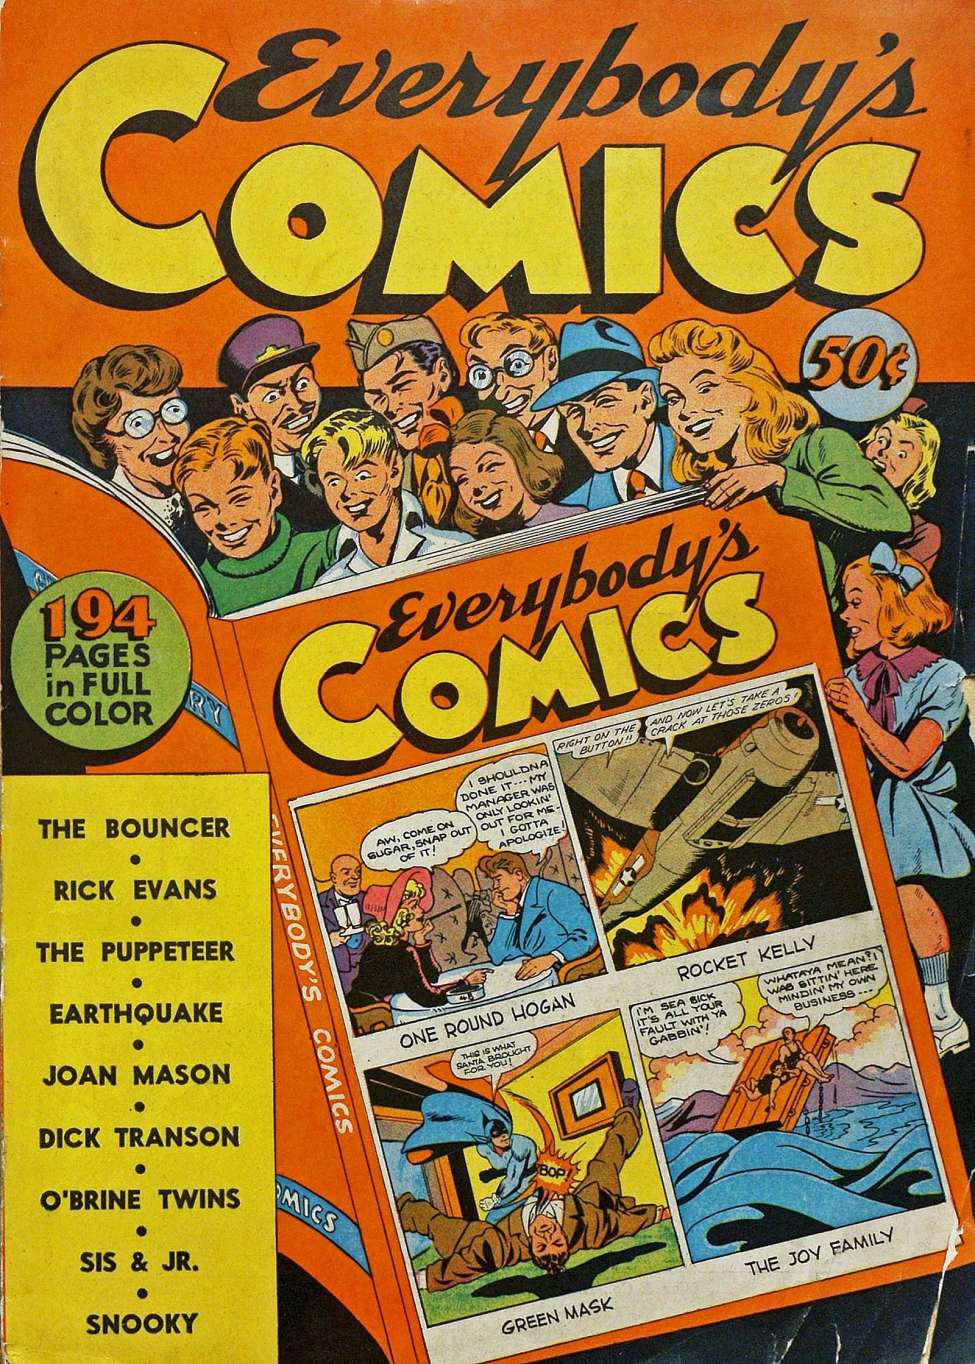 Book Cover For Everybody's Comics nn - Version 1